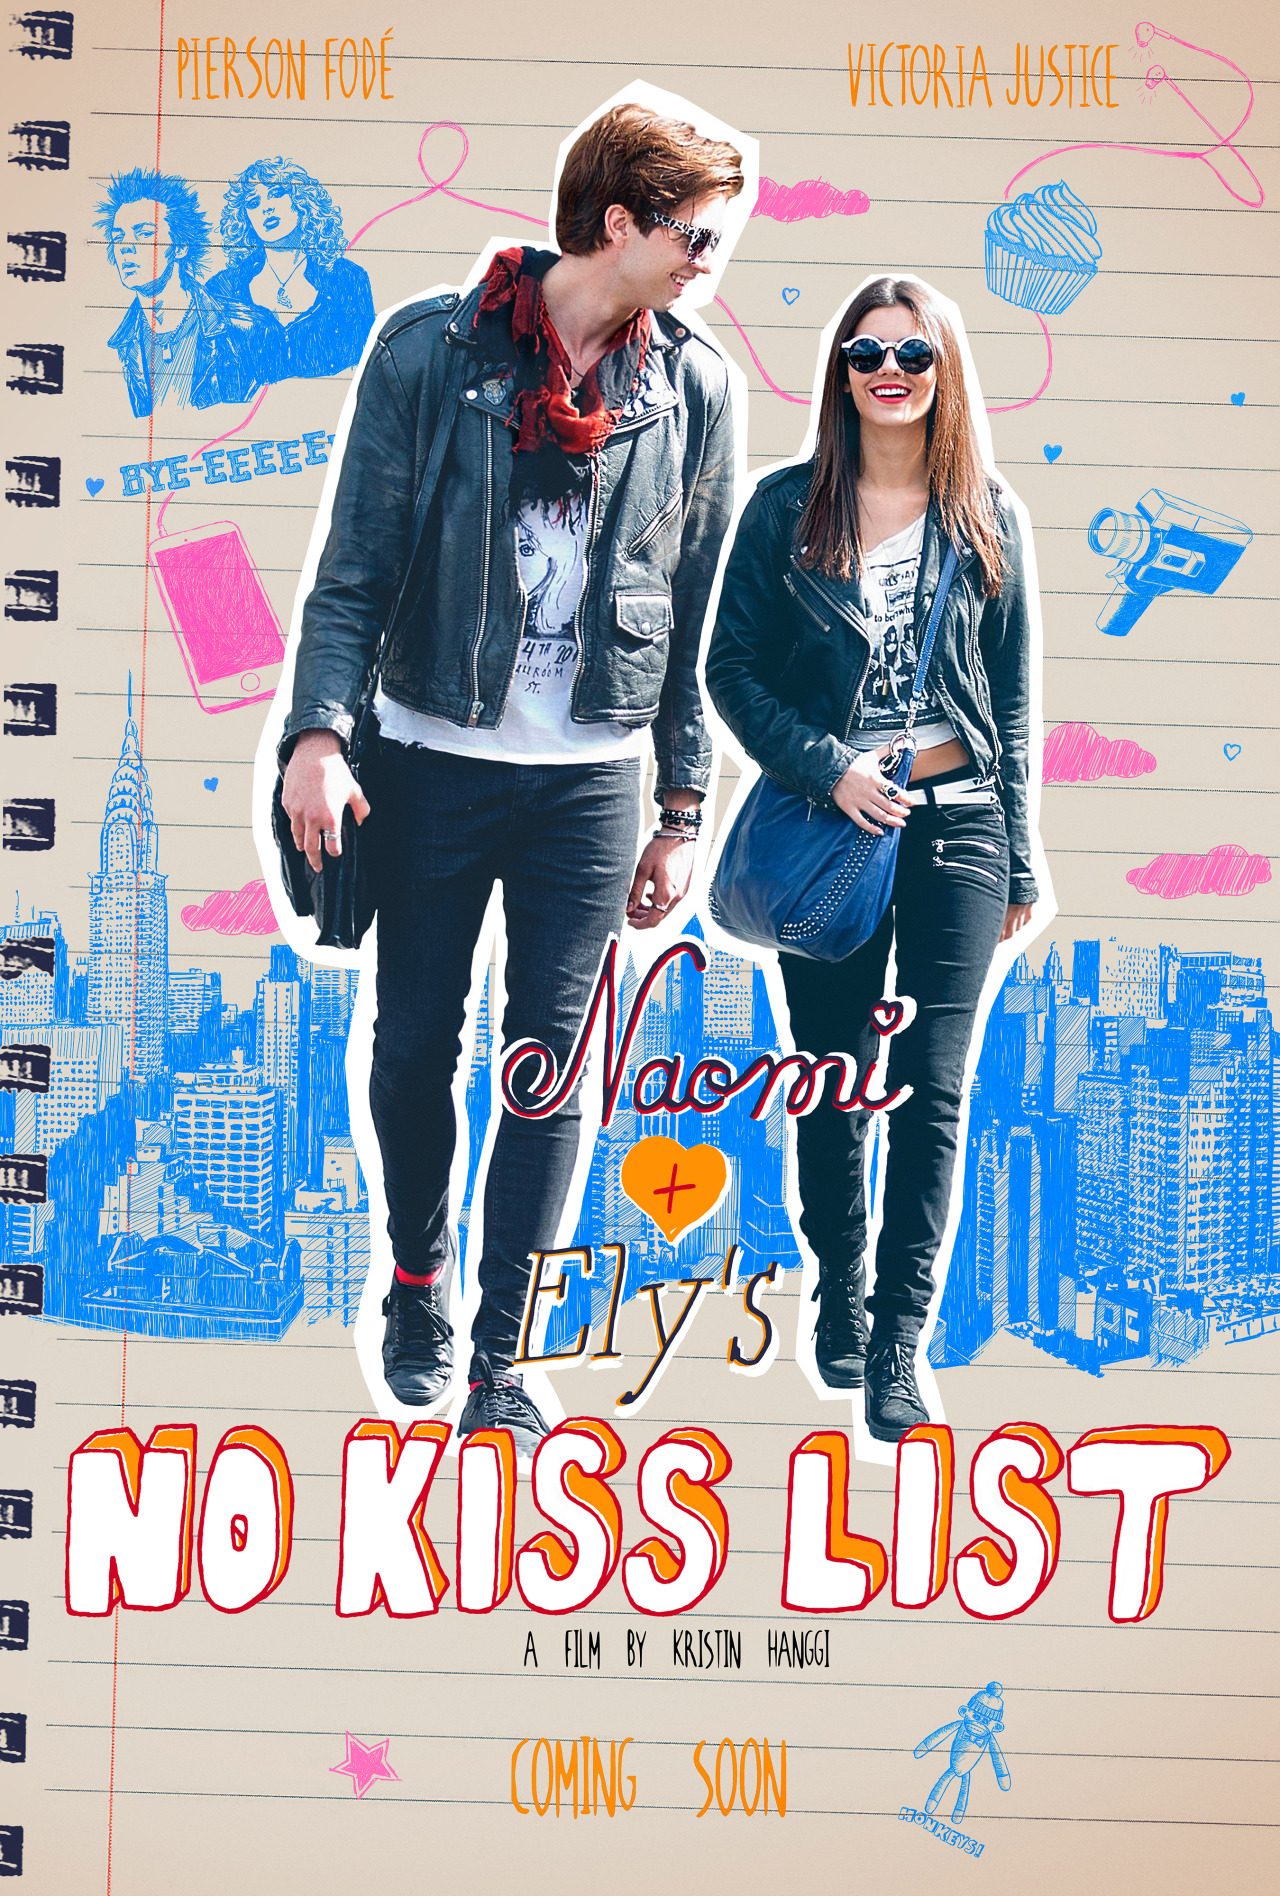 Victoria Justice in Naomi and Ely's No Kiss List